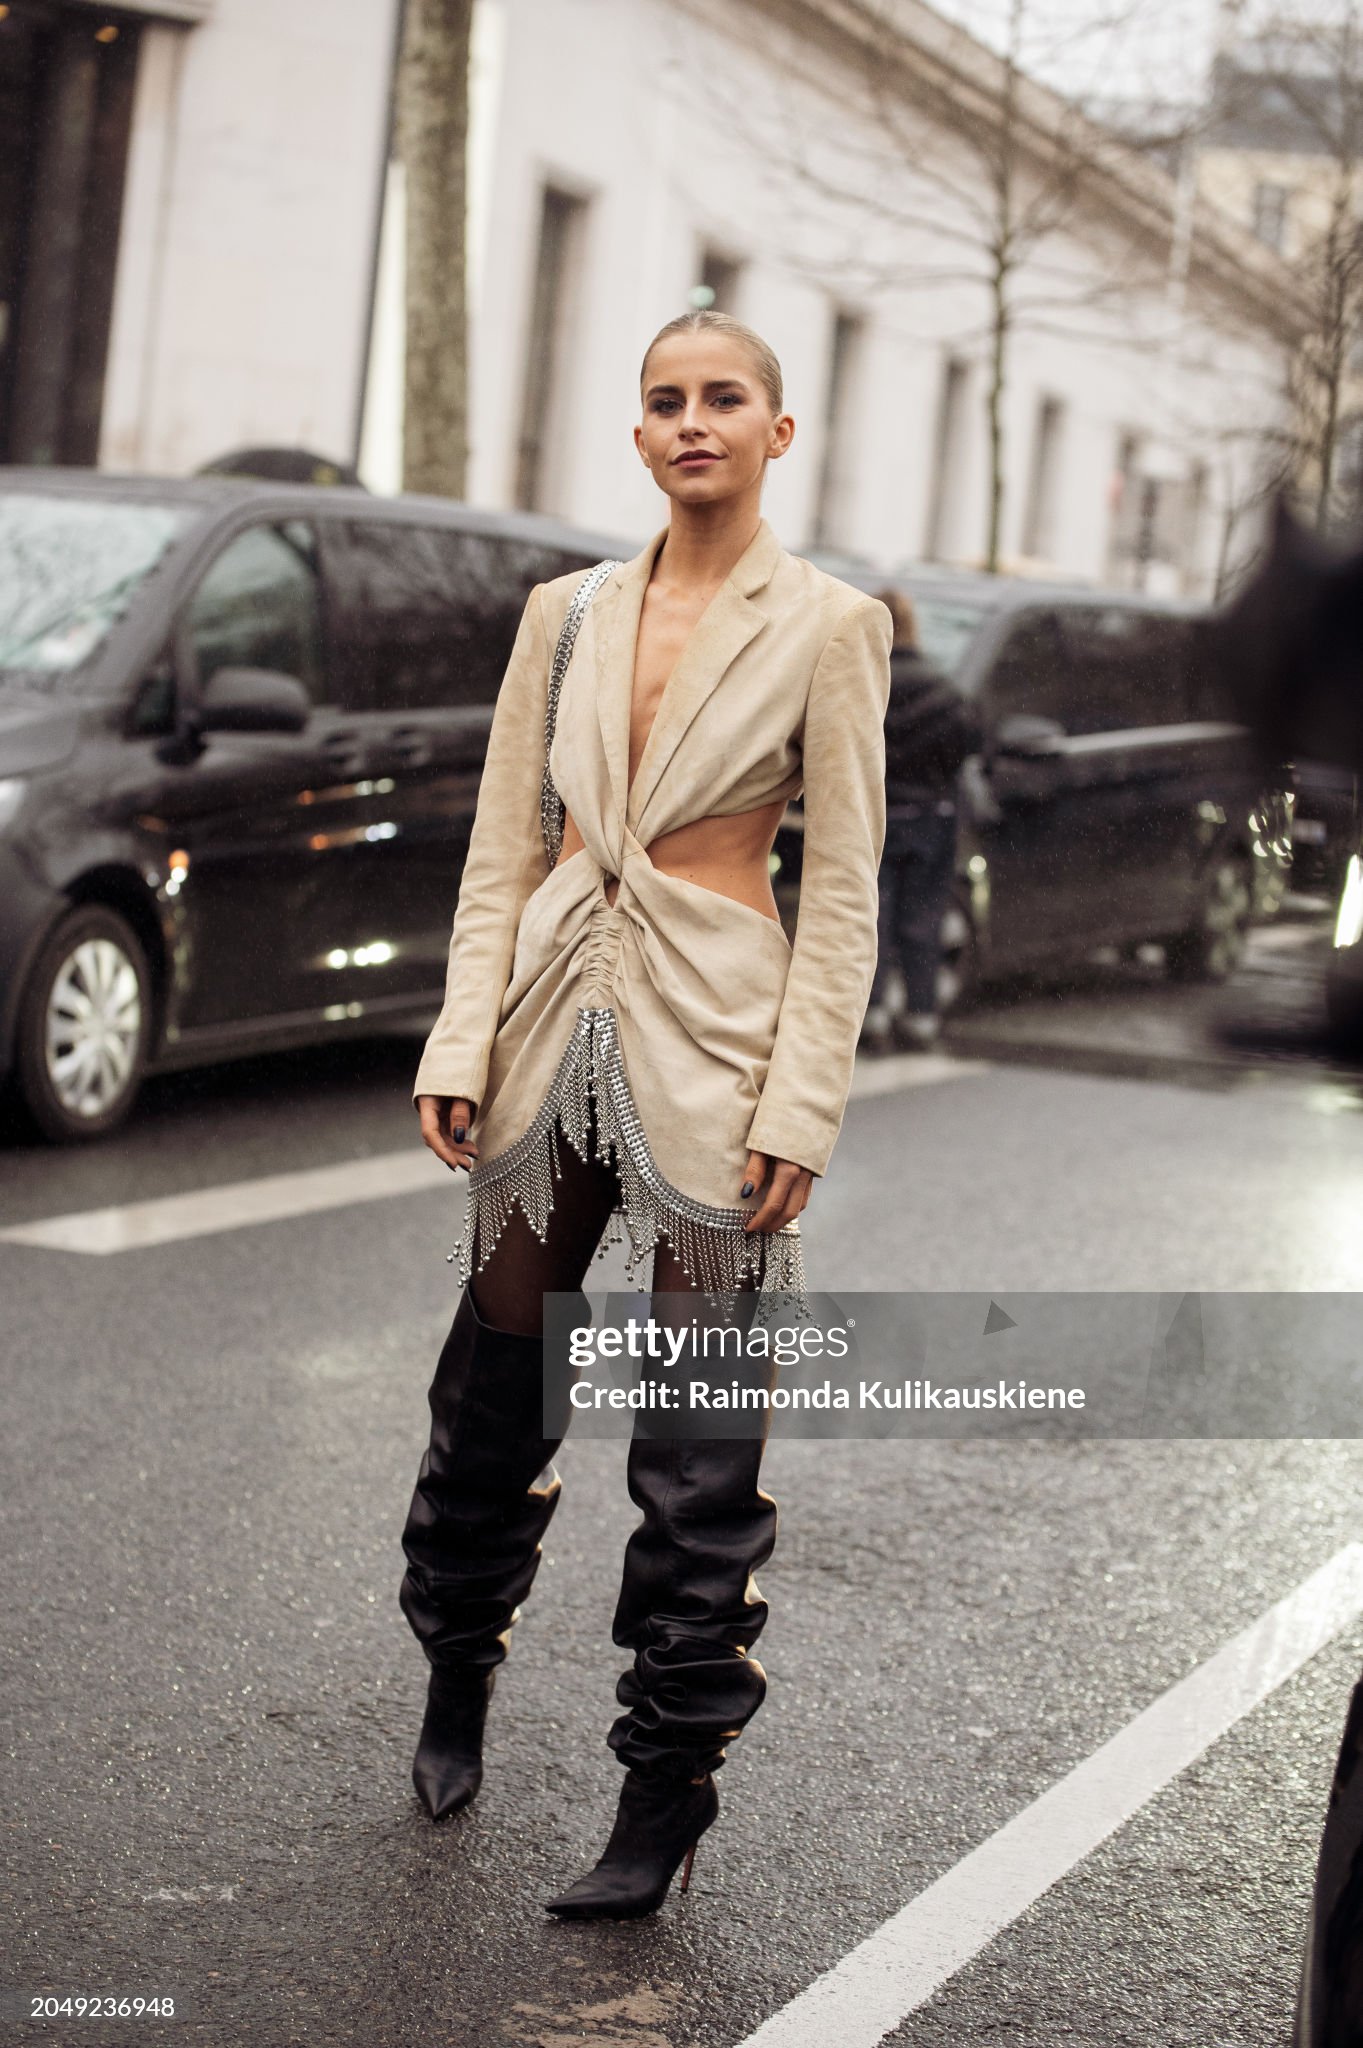 paris-france-caro-daur-wears-long-black-leather-boots-beige-mini-dress-with-cut-outs-and-metal.jpg